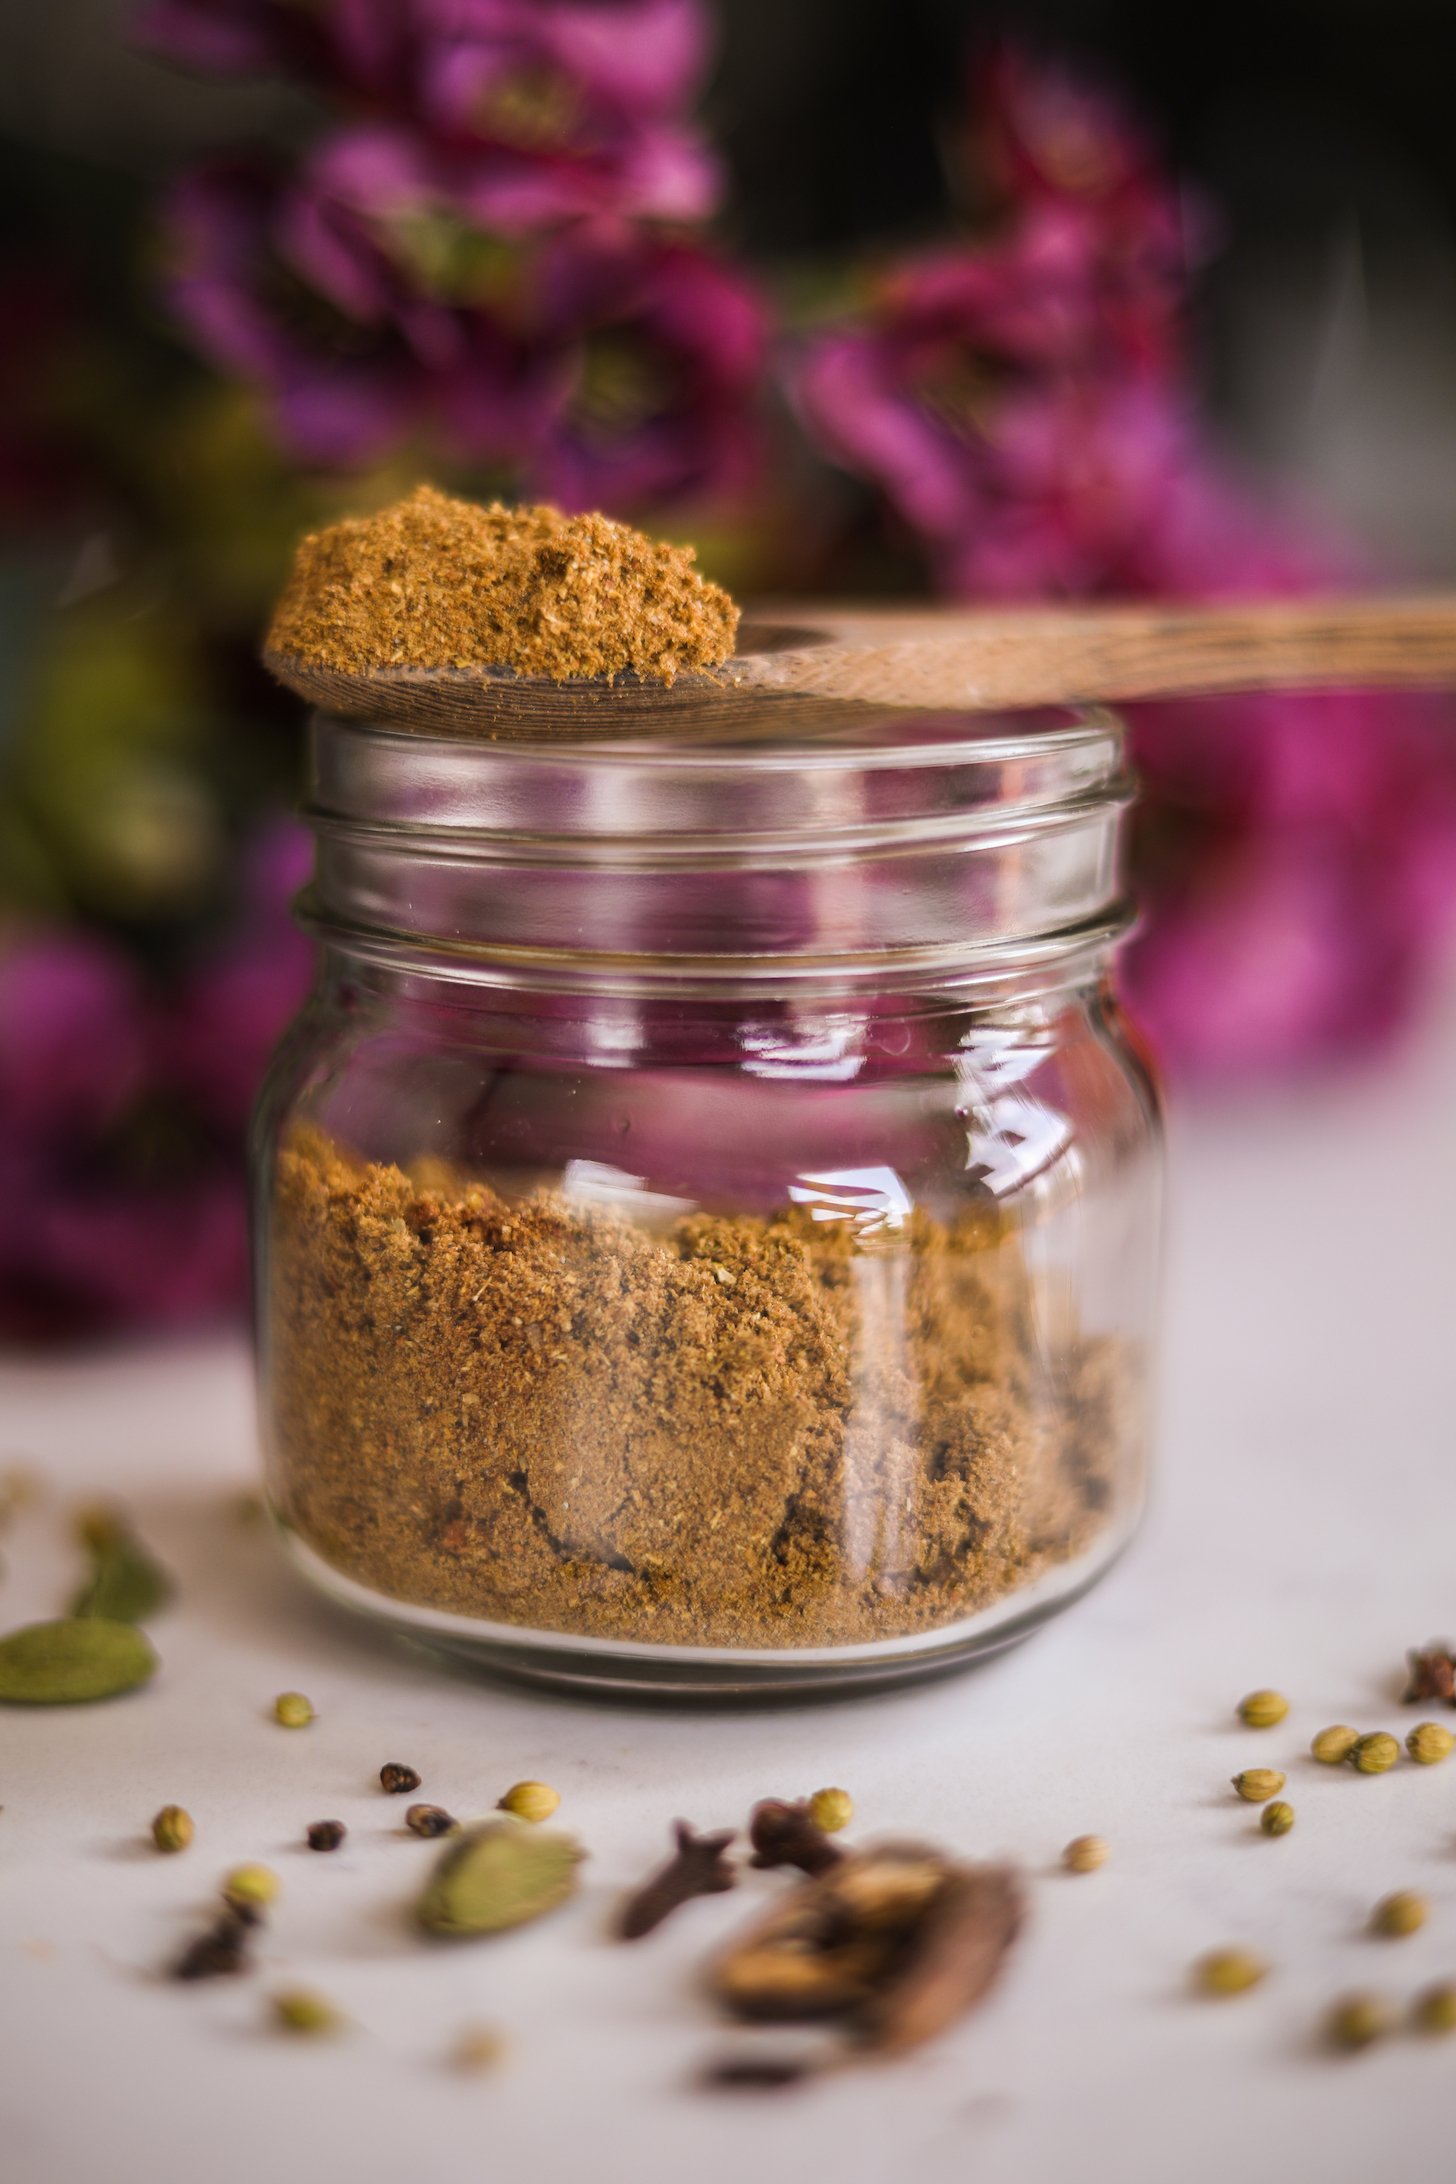 A perspective image of a wooden heaped full spoon of brown powdered spice balancing on the rim of a mason jar with a bouquet of flowers in the background.